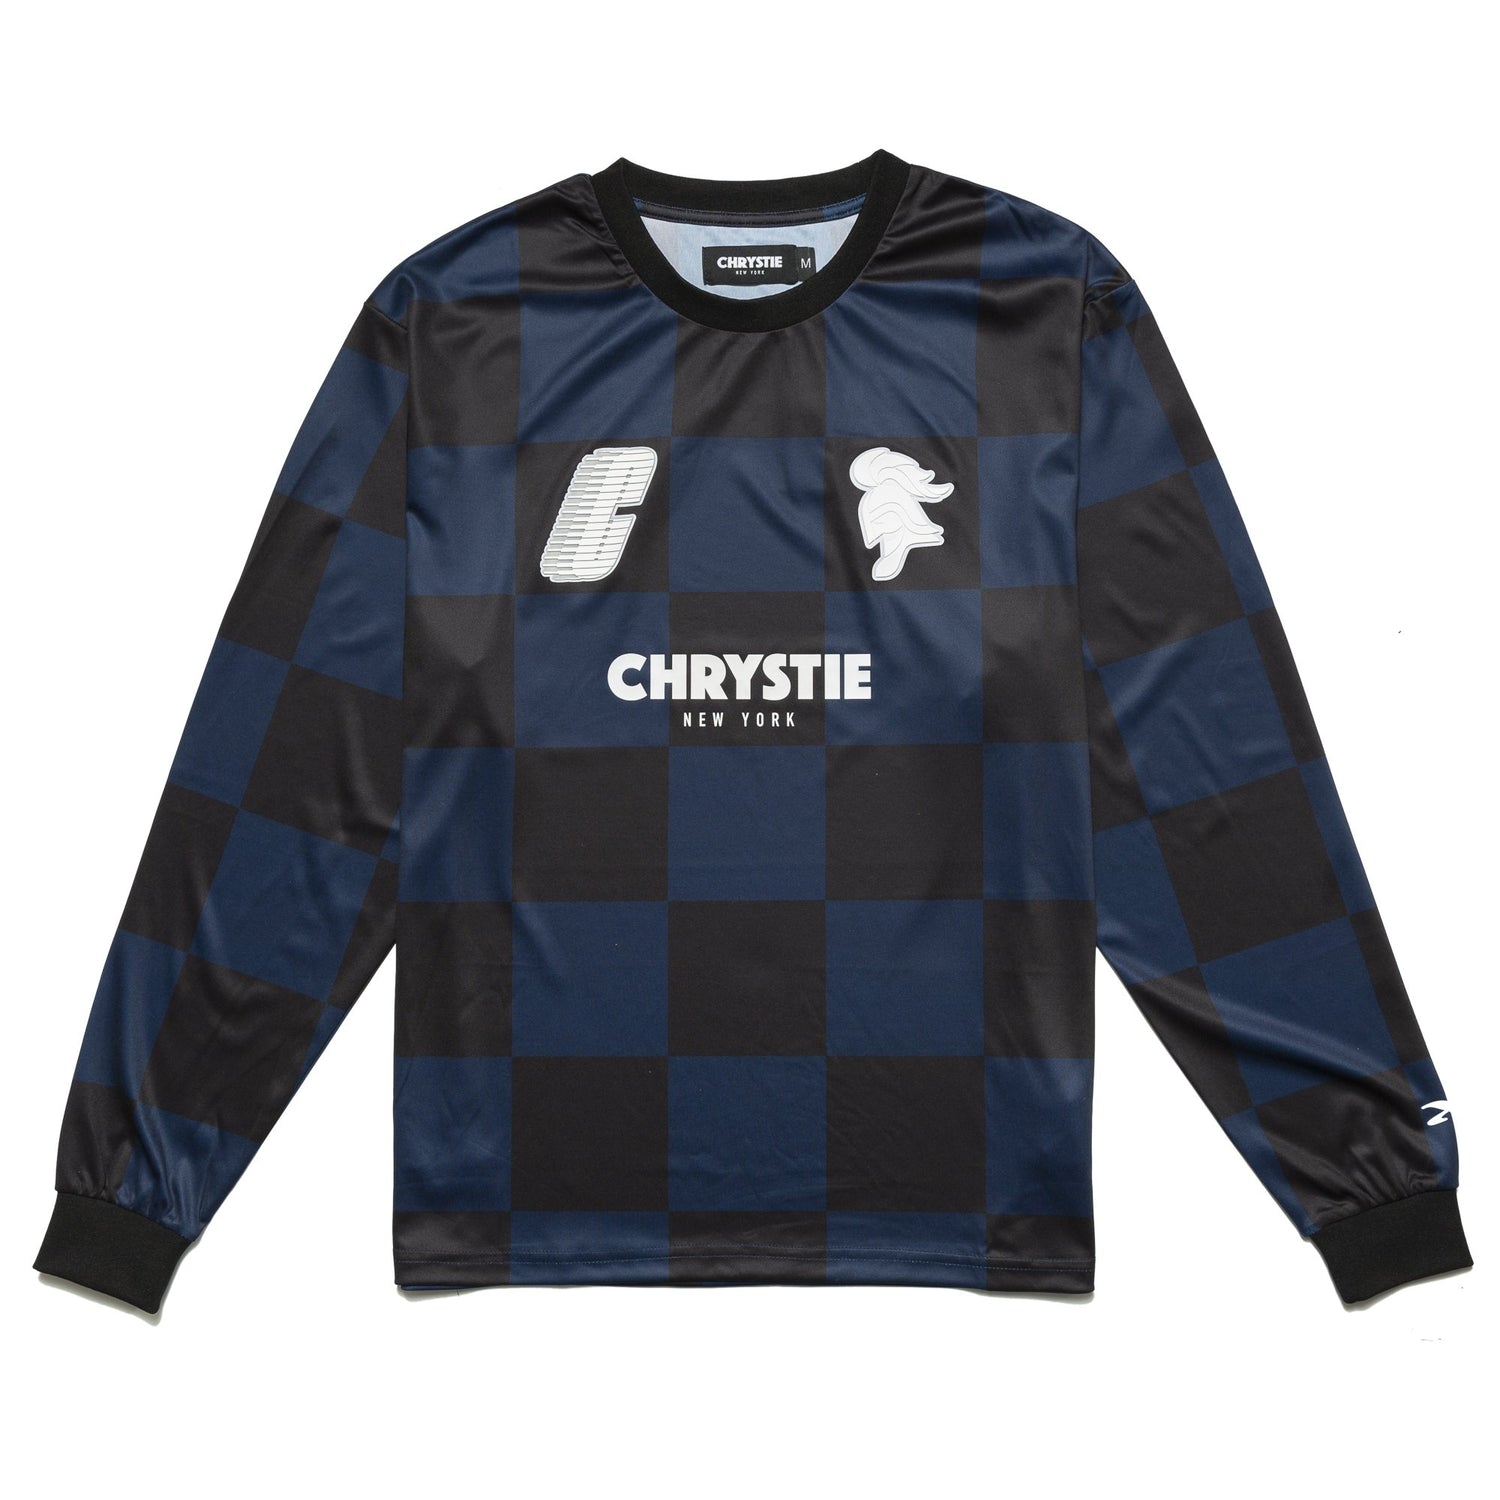 Chrystie NYC x Soho Warriors - SWFC 10th Anniversary Soccer Jersey / Away Color